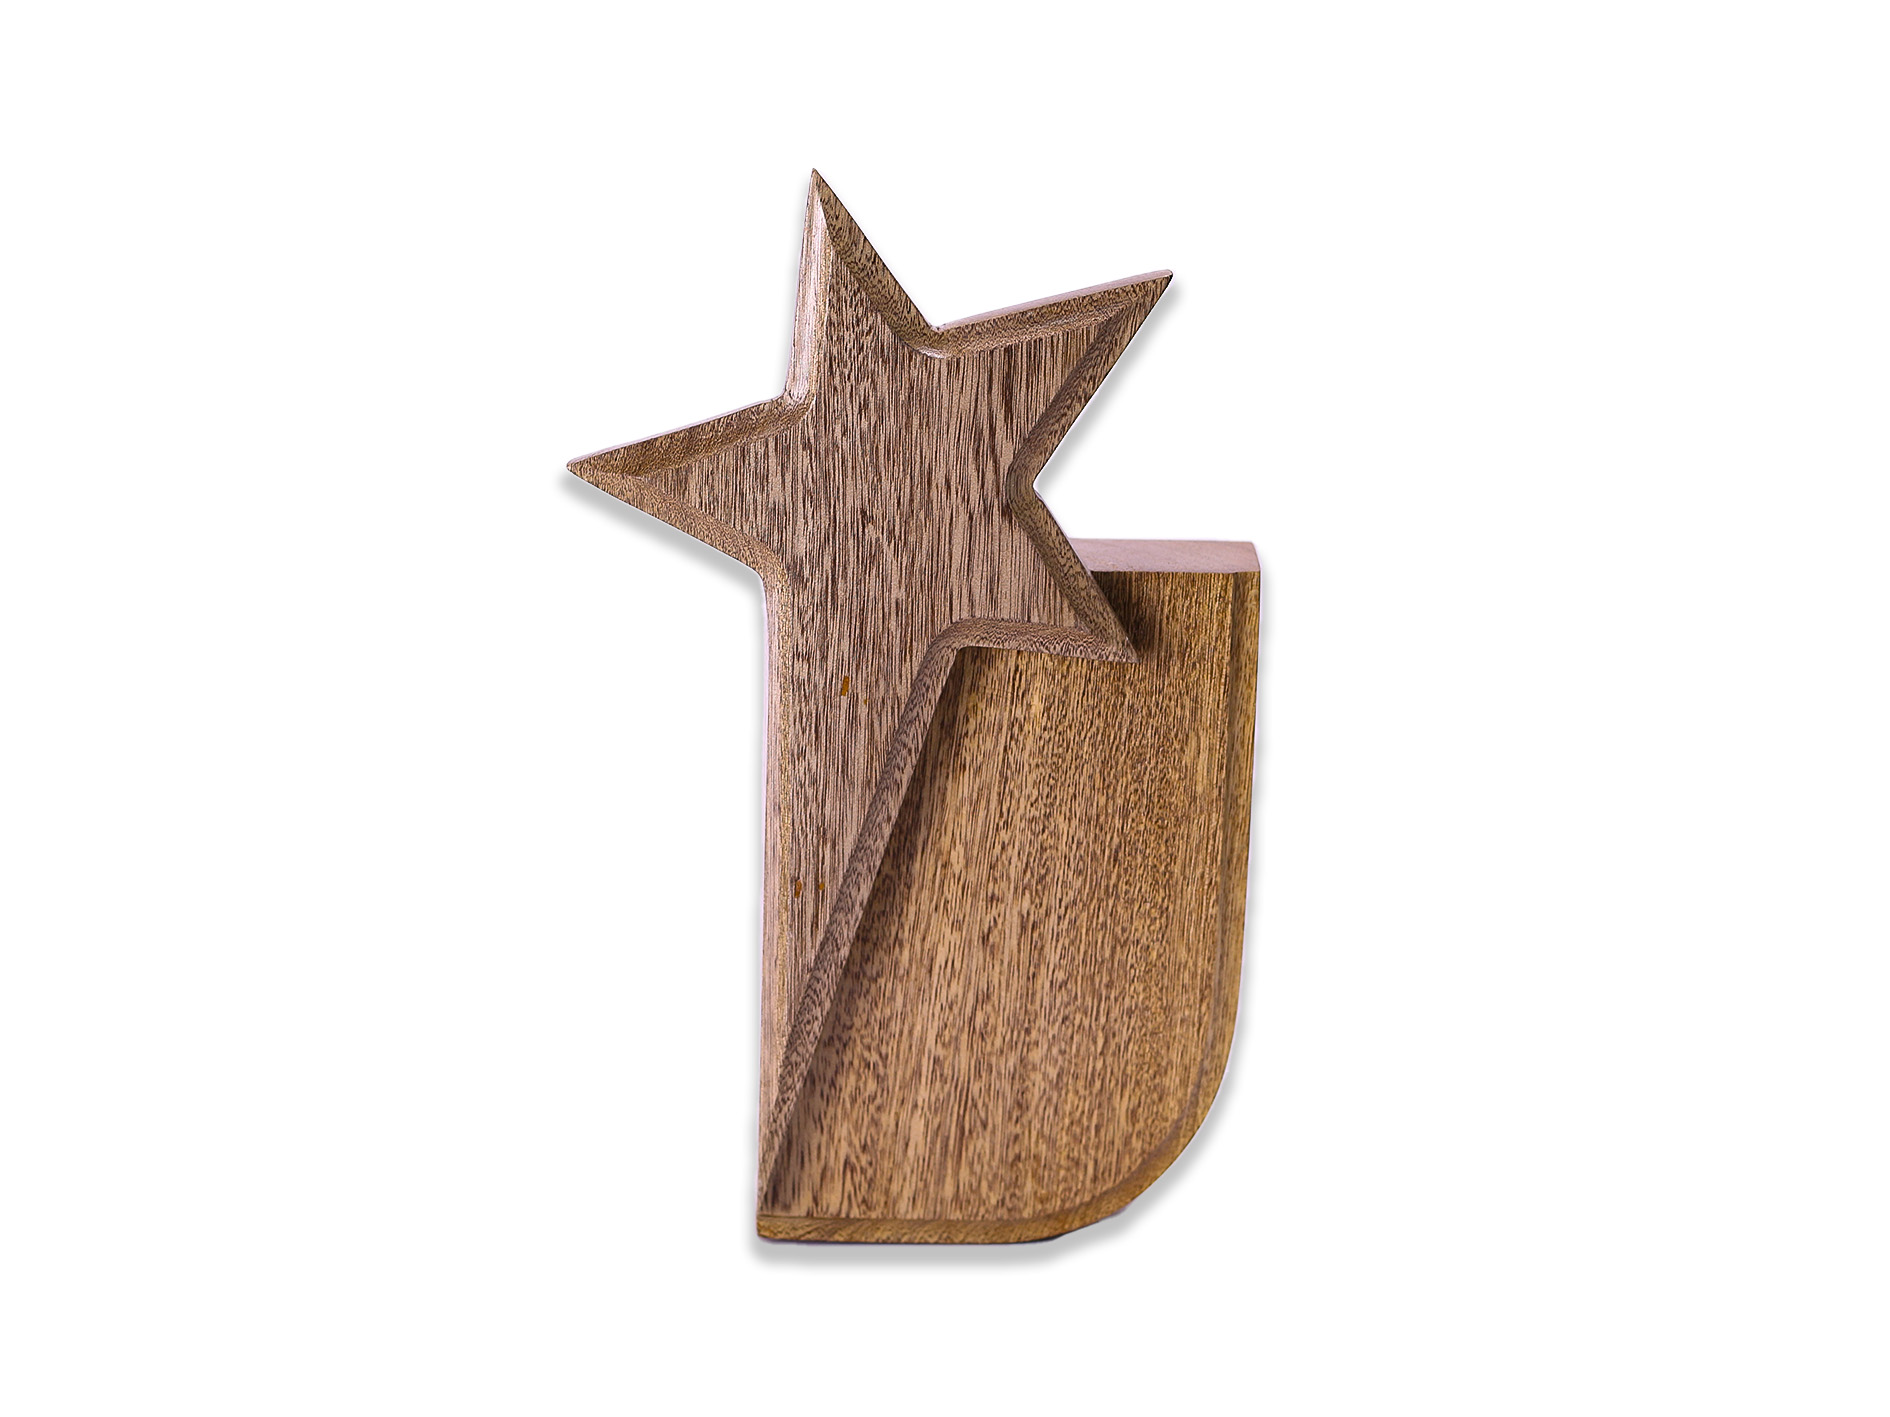 Pointed Star Curved Body Award